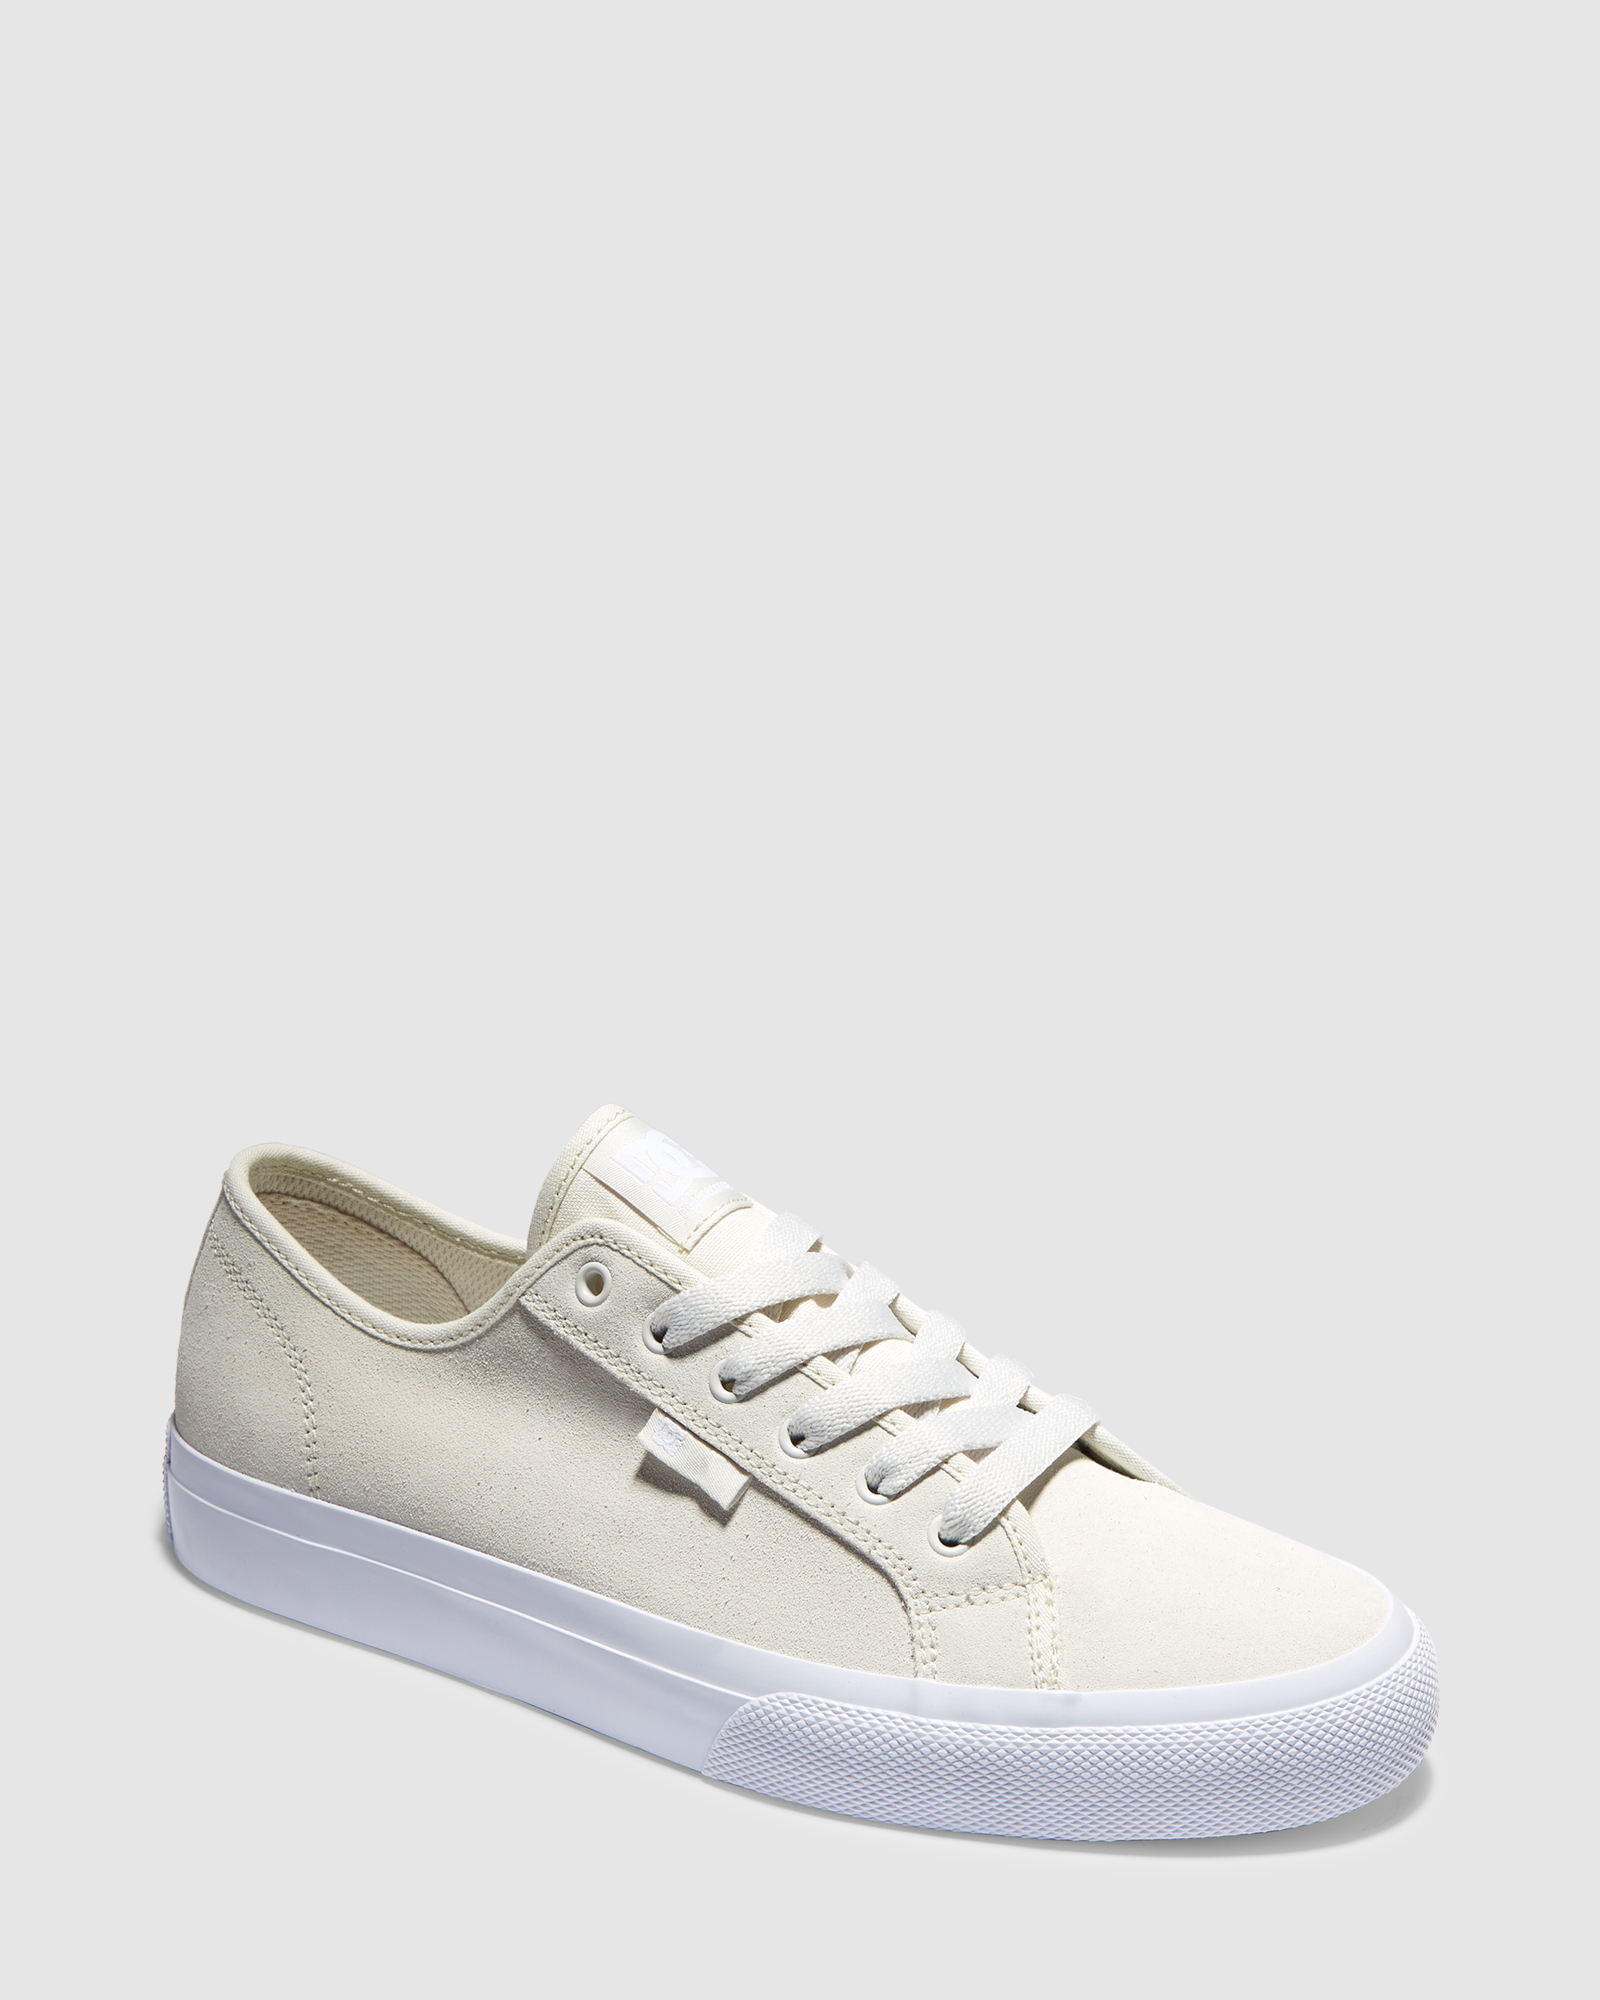 Dc Shoes Men's Manual Shoes - Off White | SurfStitch